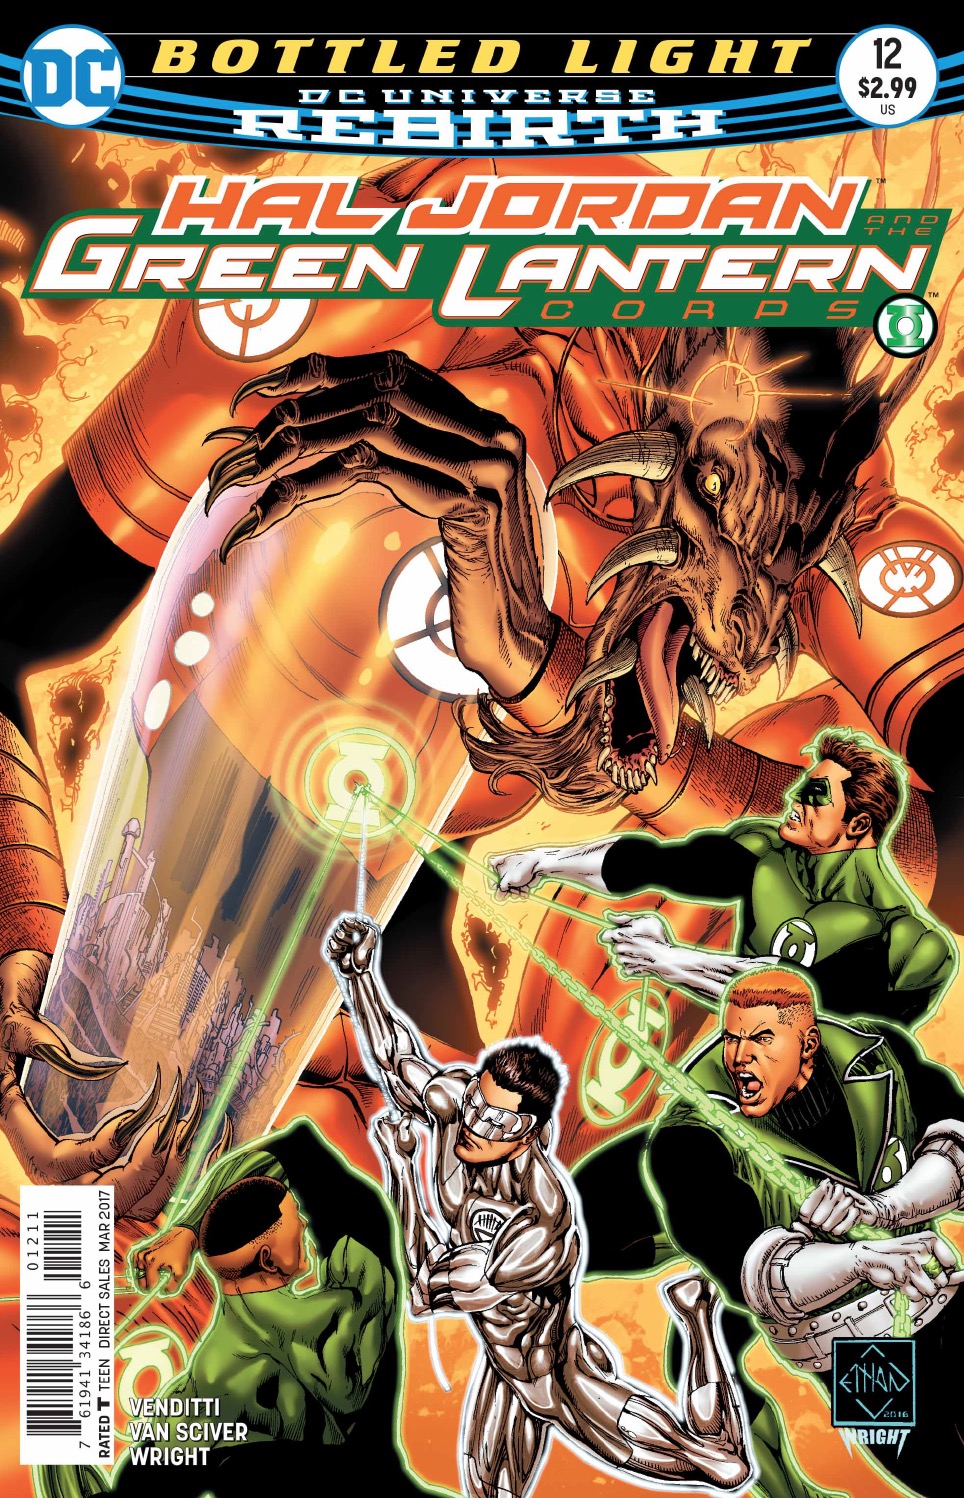 Hal Jordan and the Green Lantern Corps #12 Review